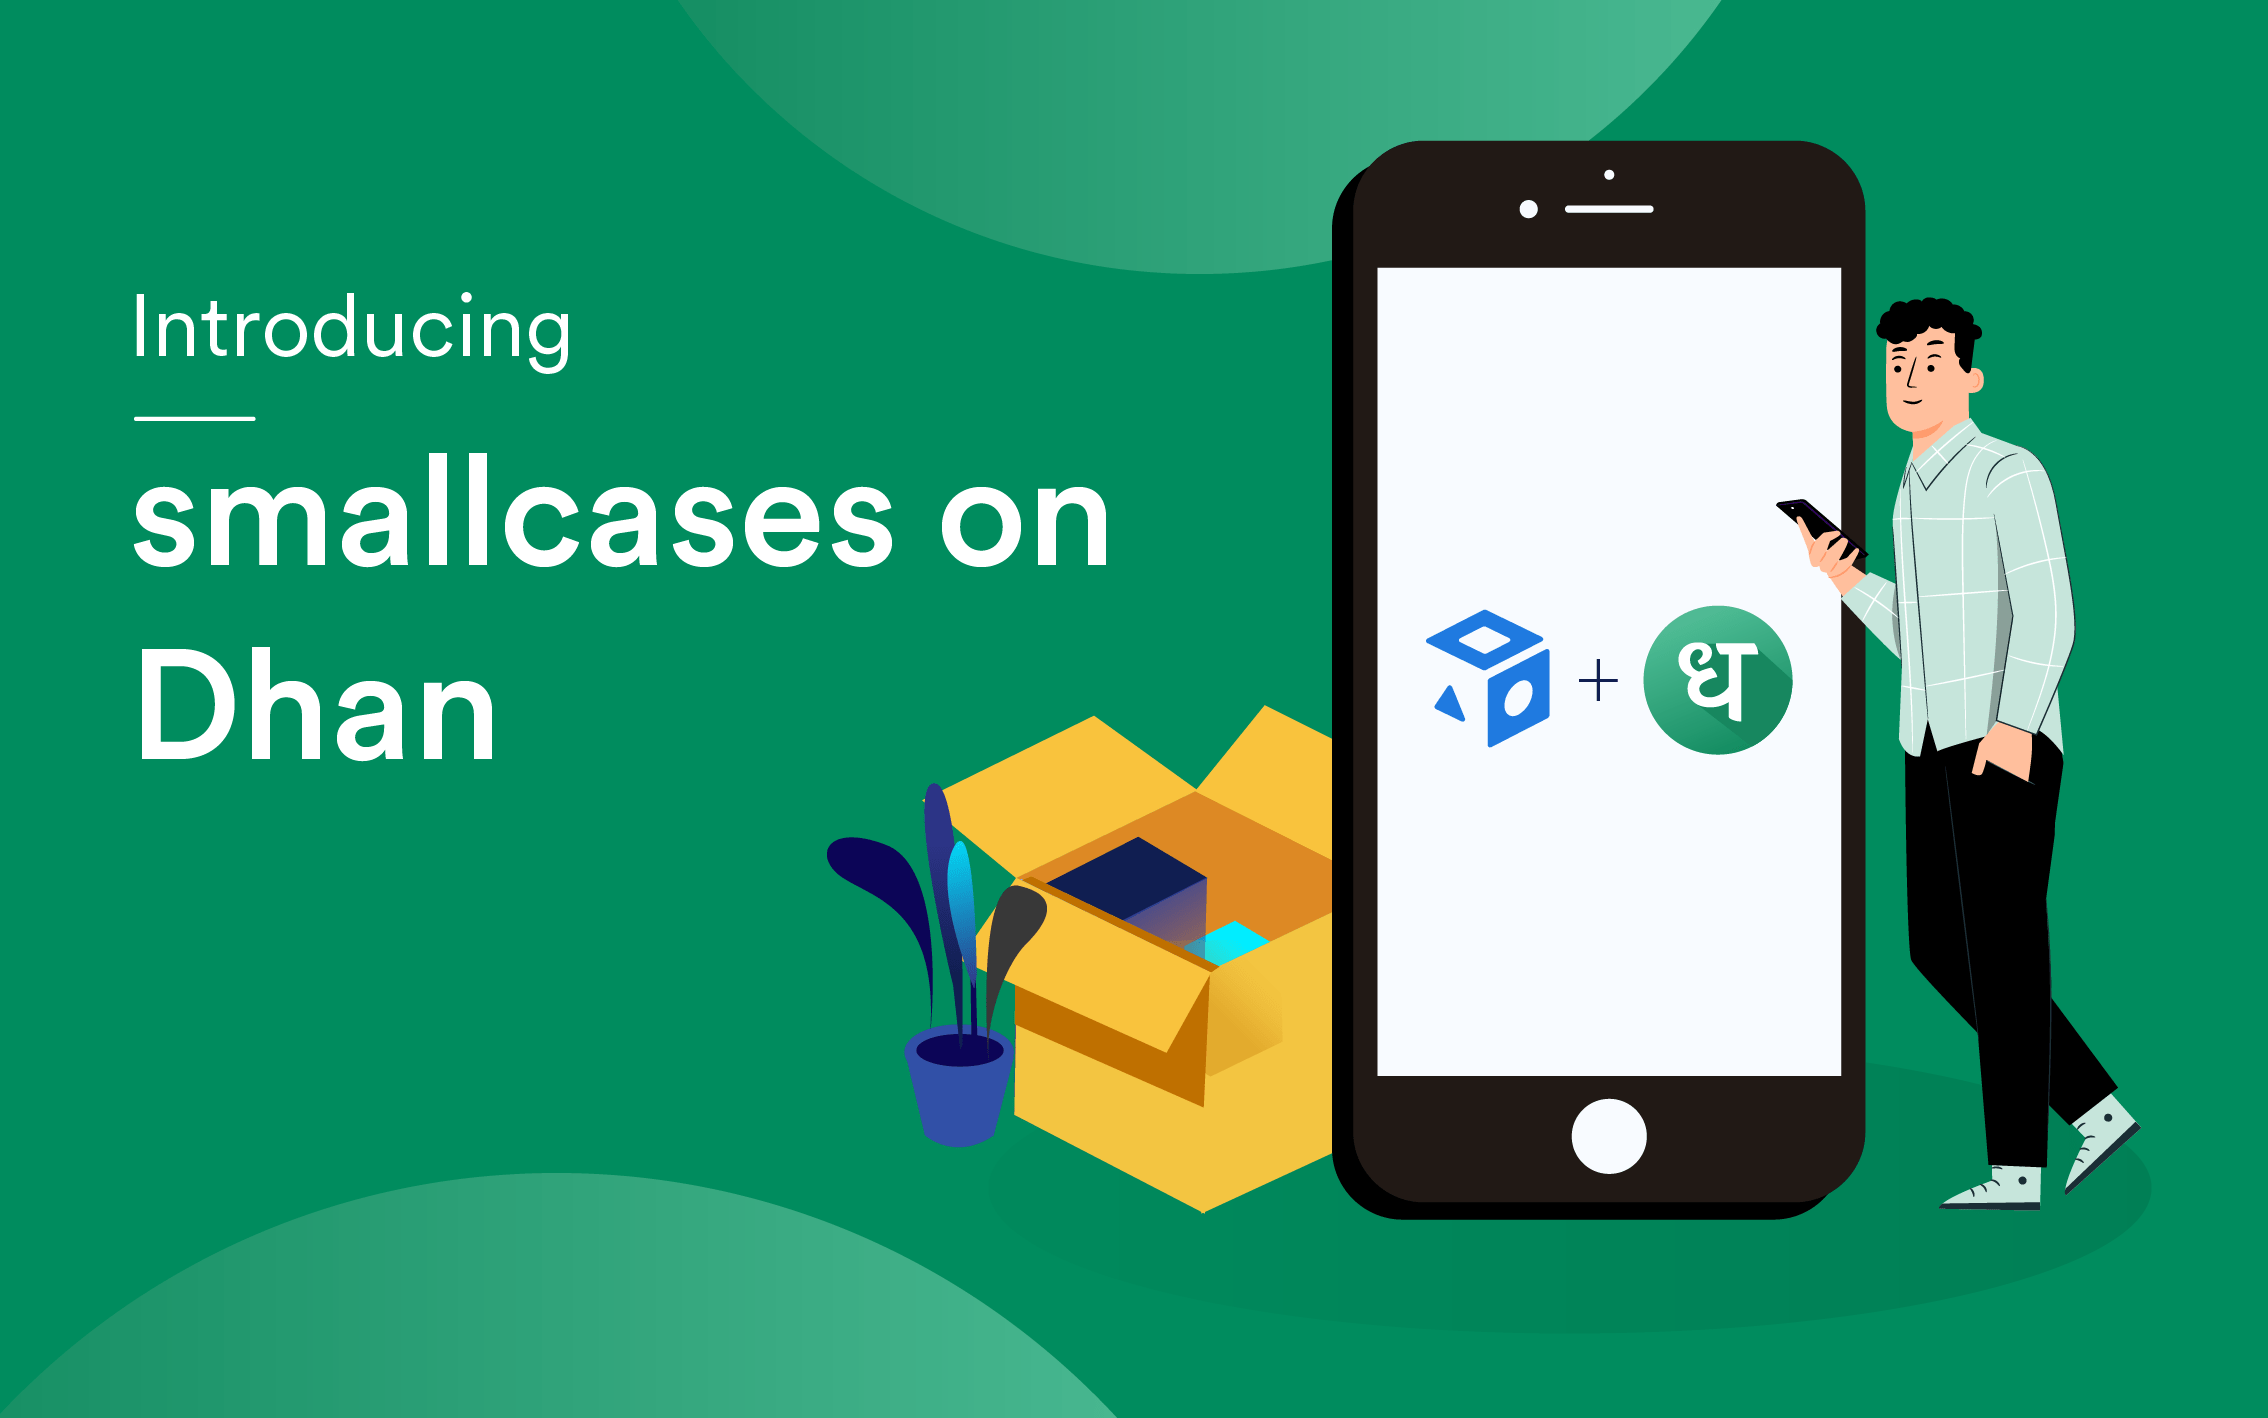 smallcases are now on Dhan!